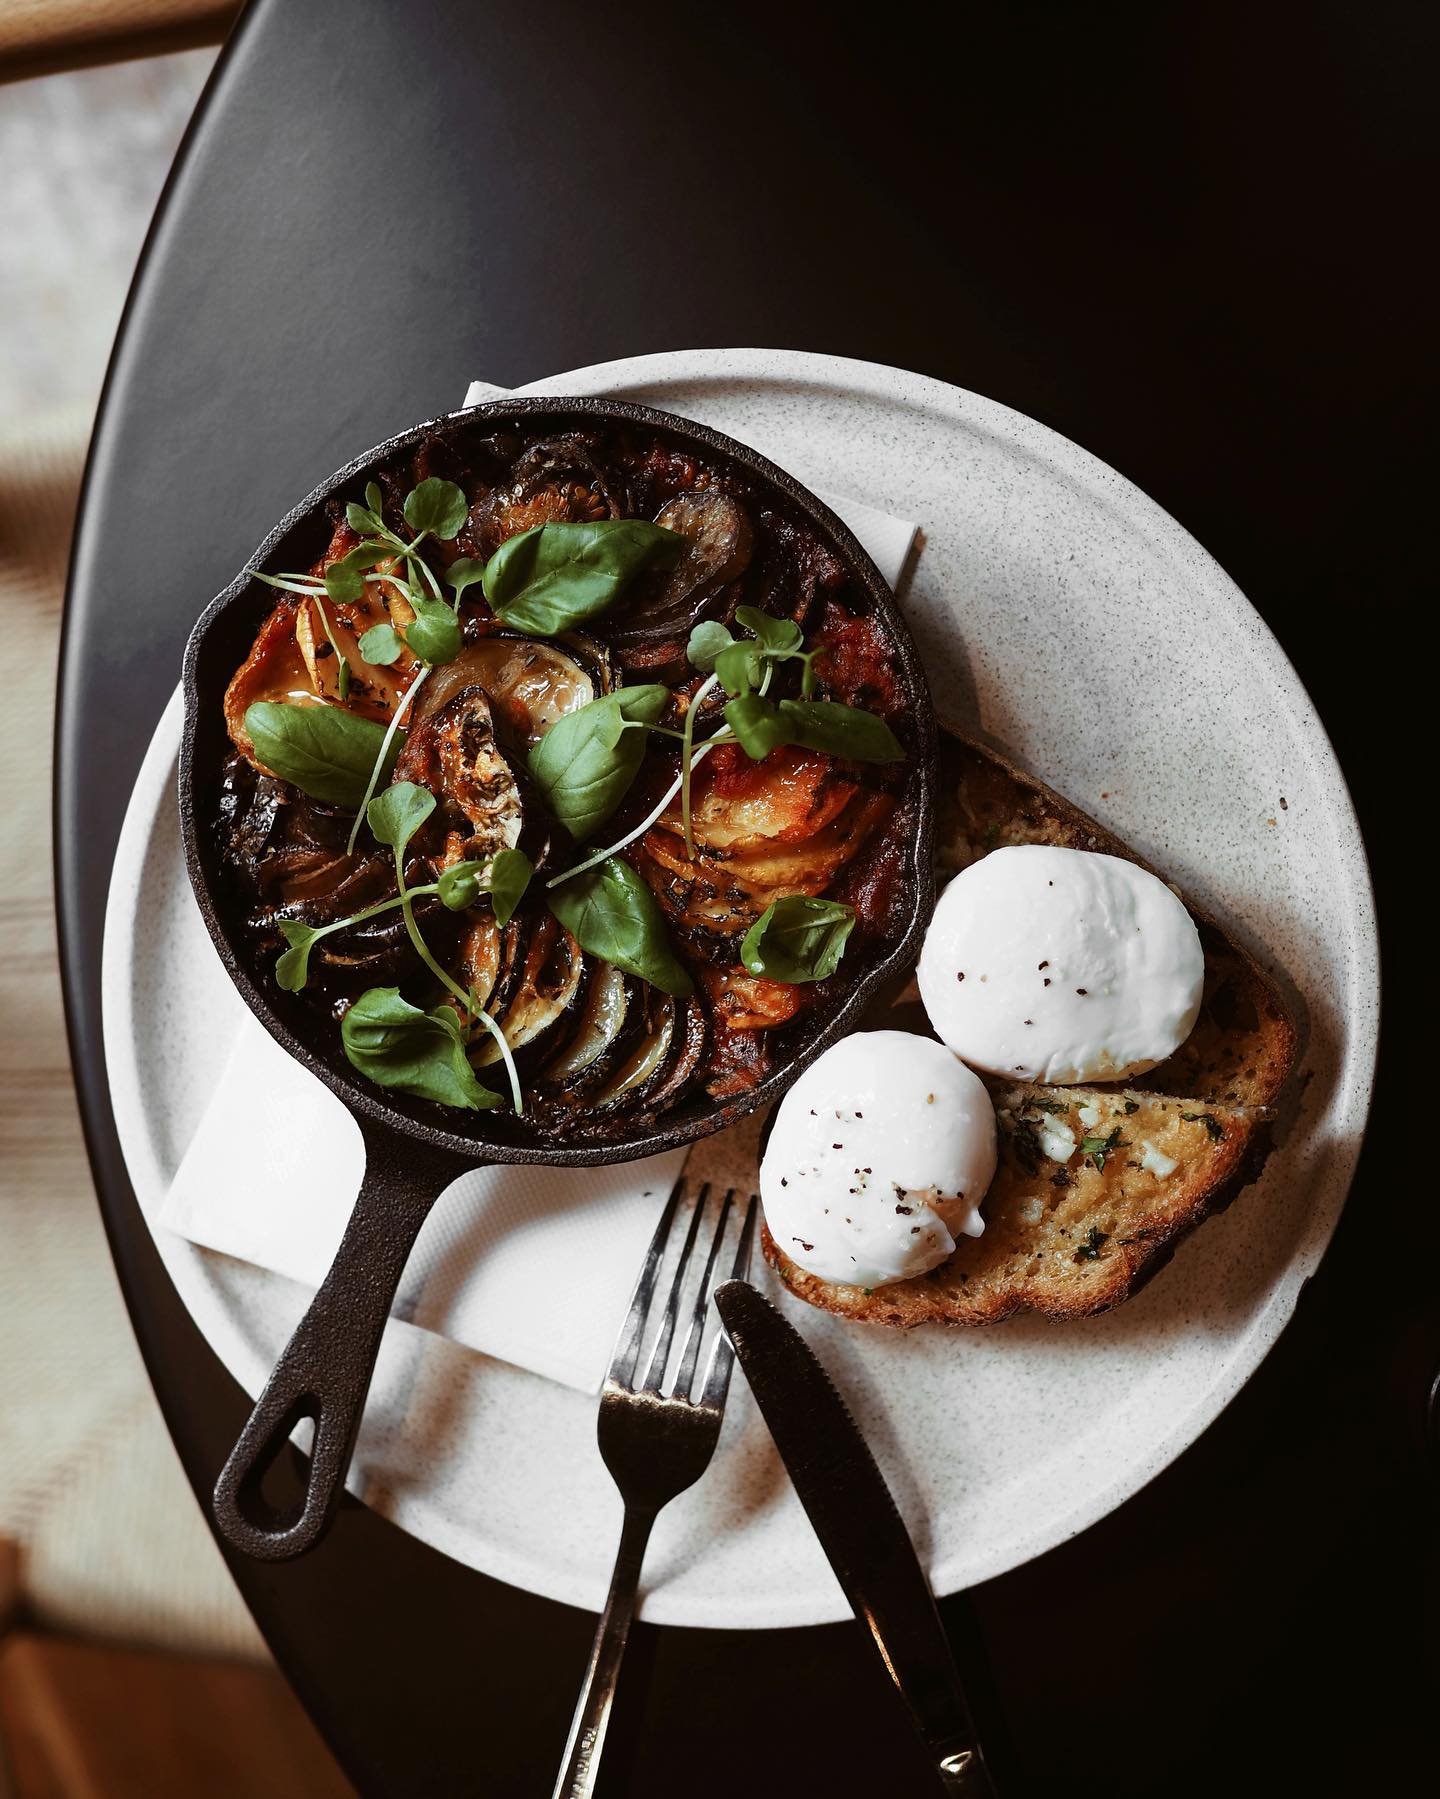 baked vegetable dish with poached eggs and rye bread